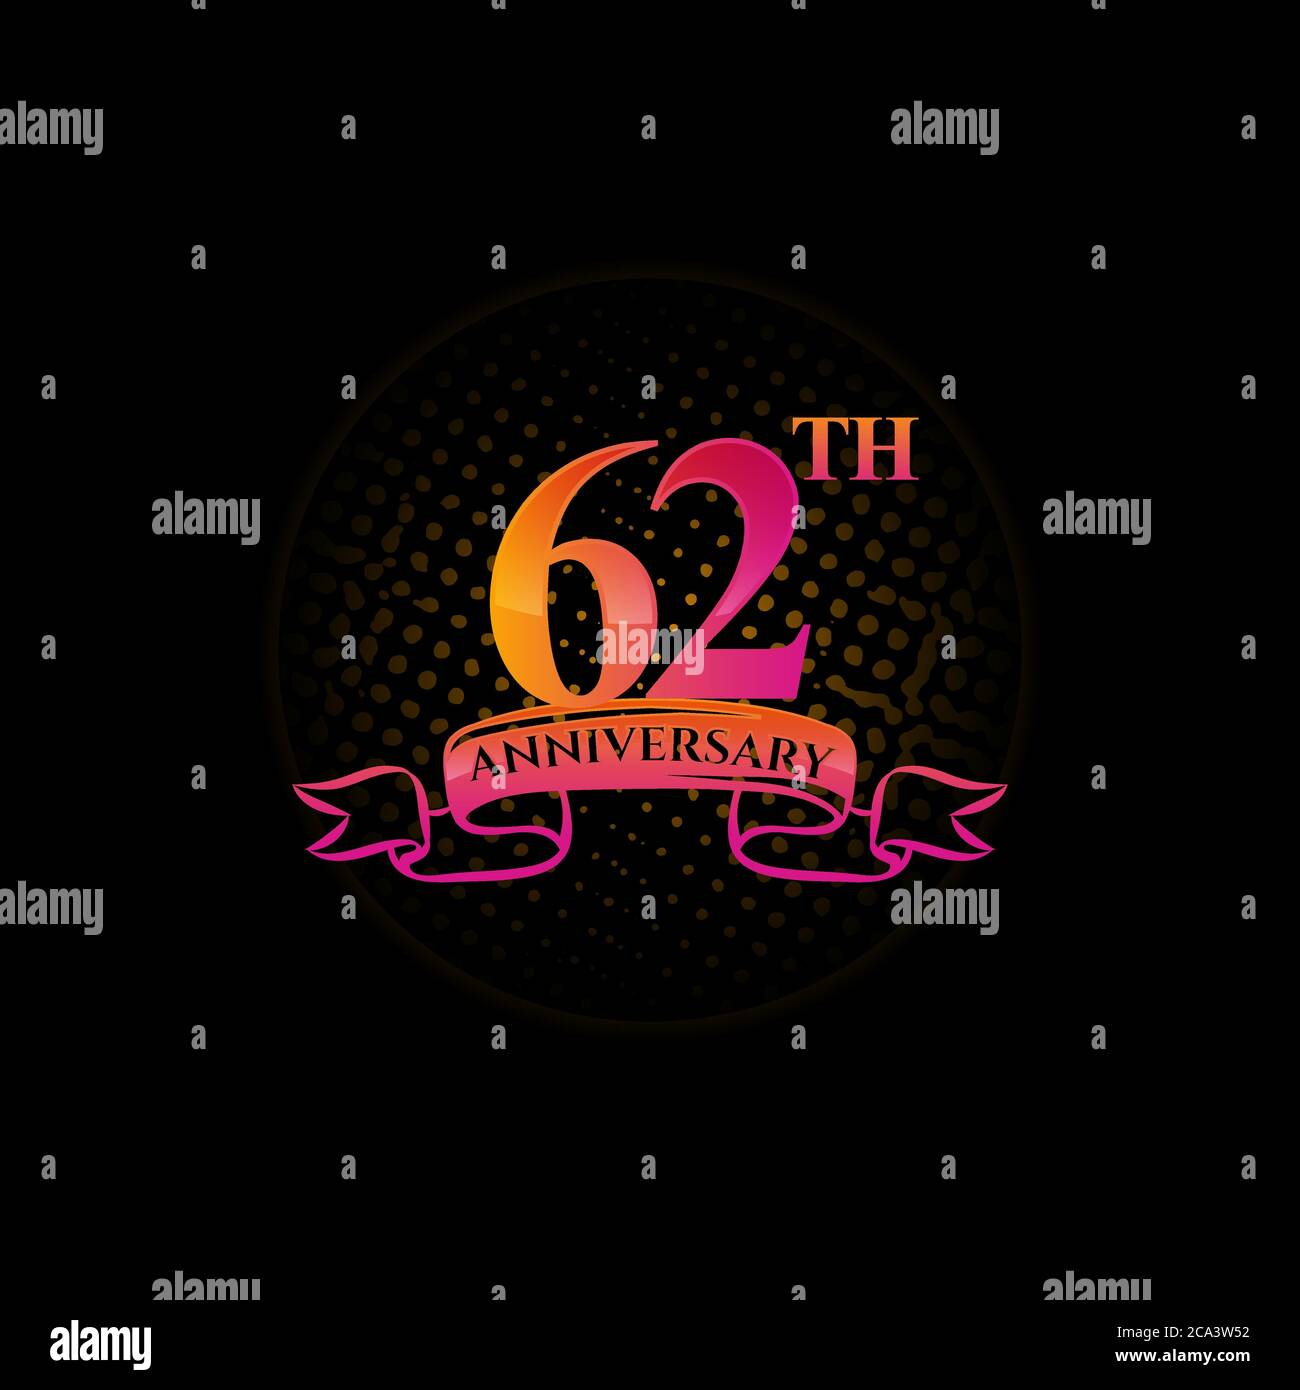 Celebrating the 62th anniversary logo, with gold rings and gradation ribbons isolated on a black background. Stock Vector